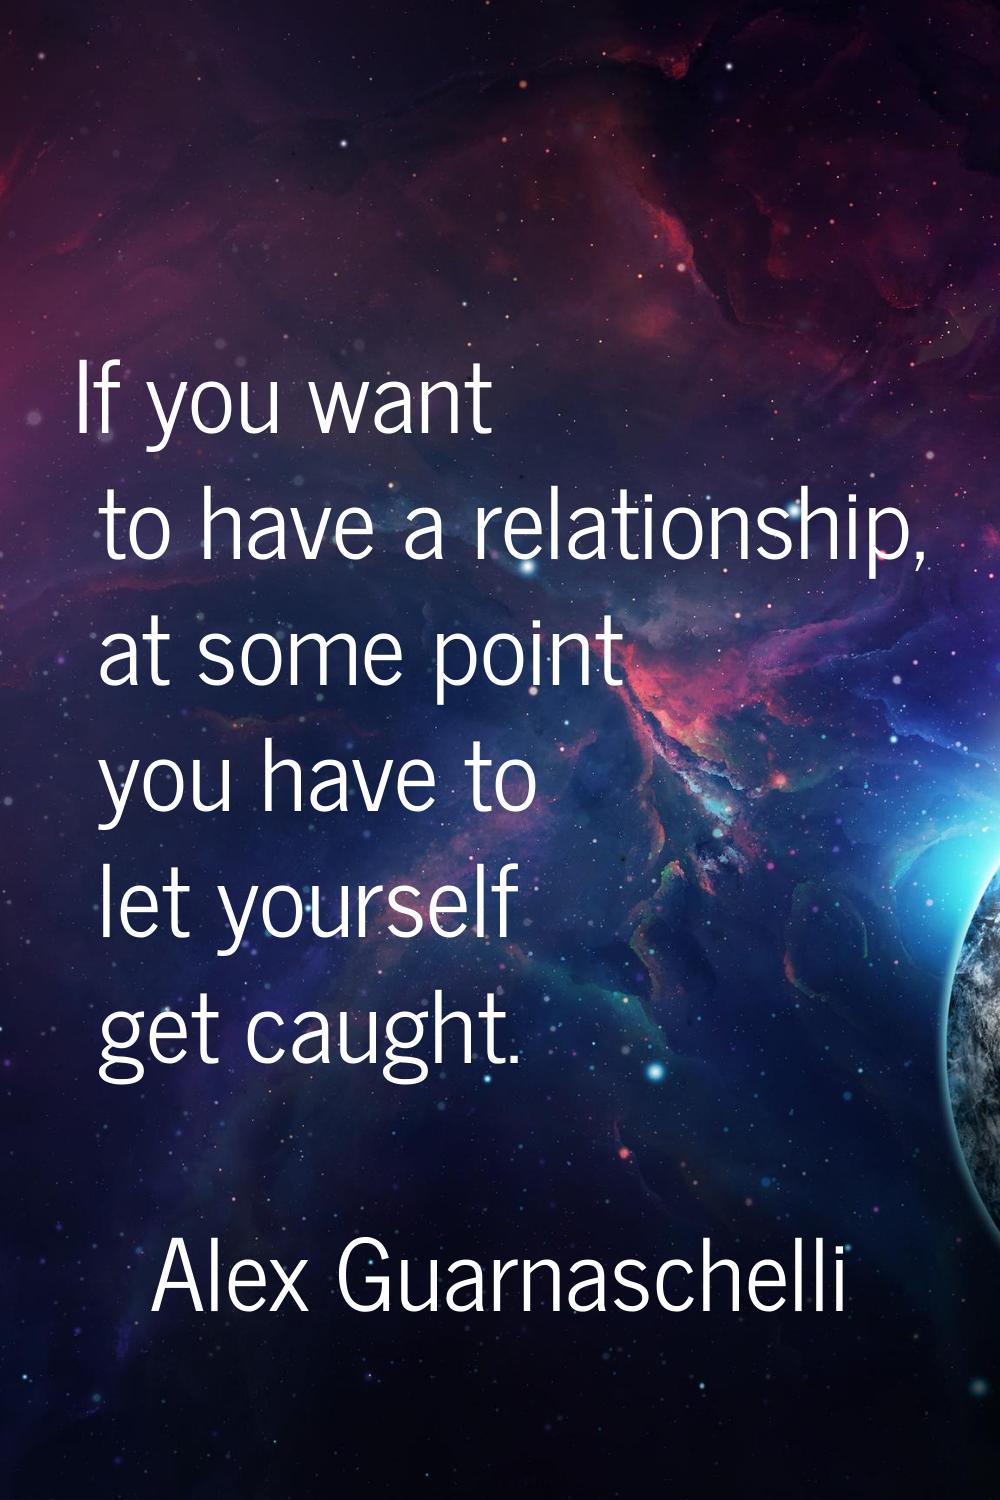 If you want to have a relationship, at some point you have to let yourself get caught.